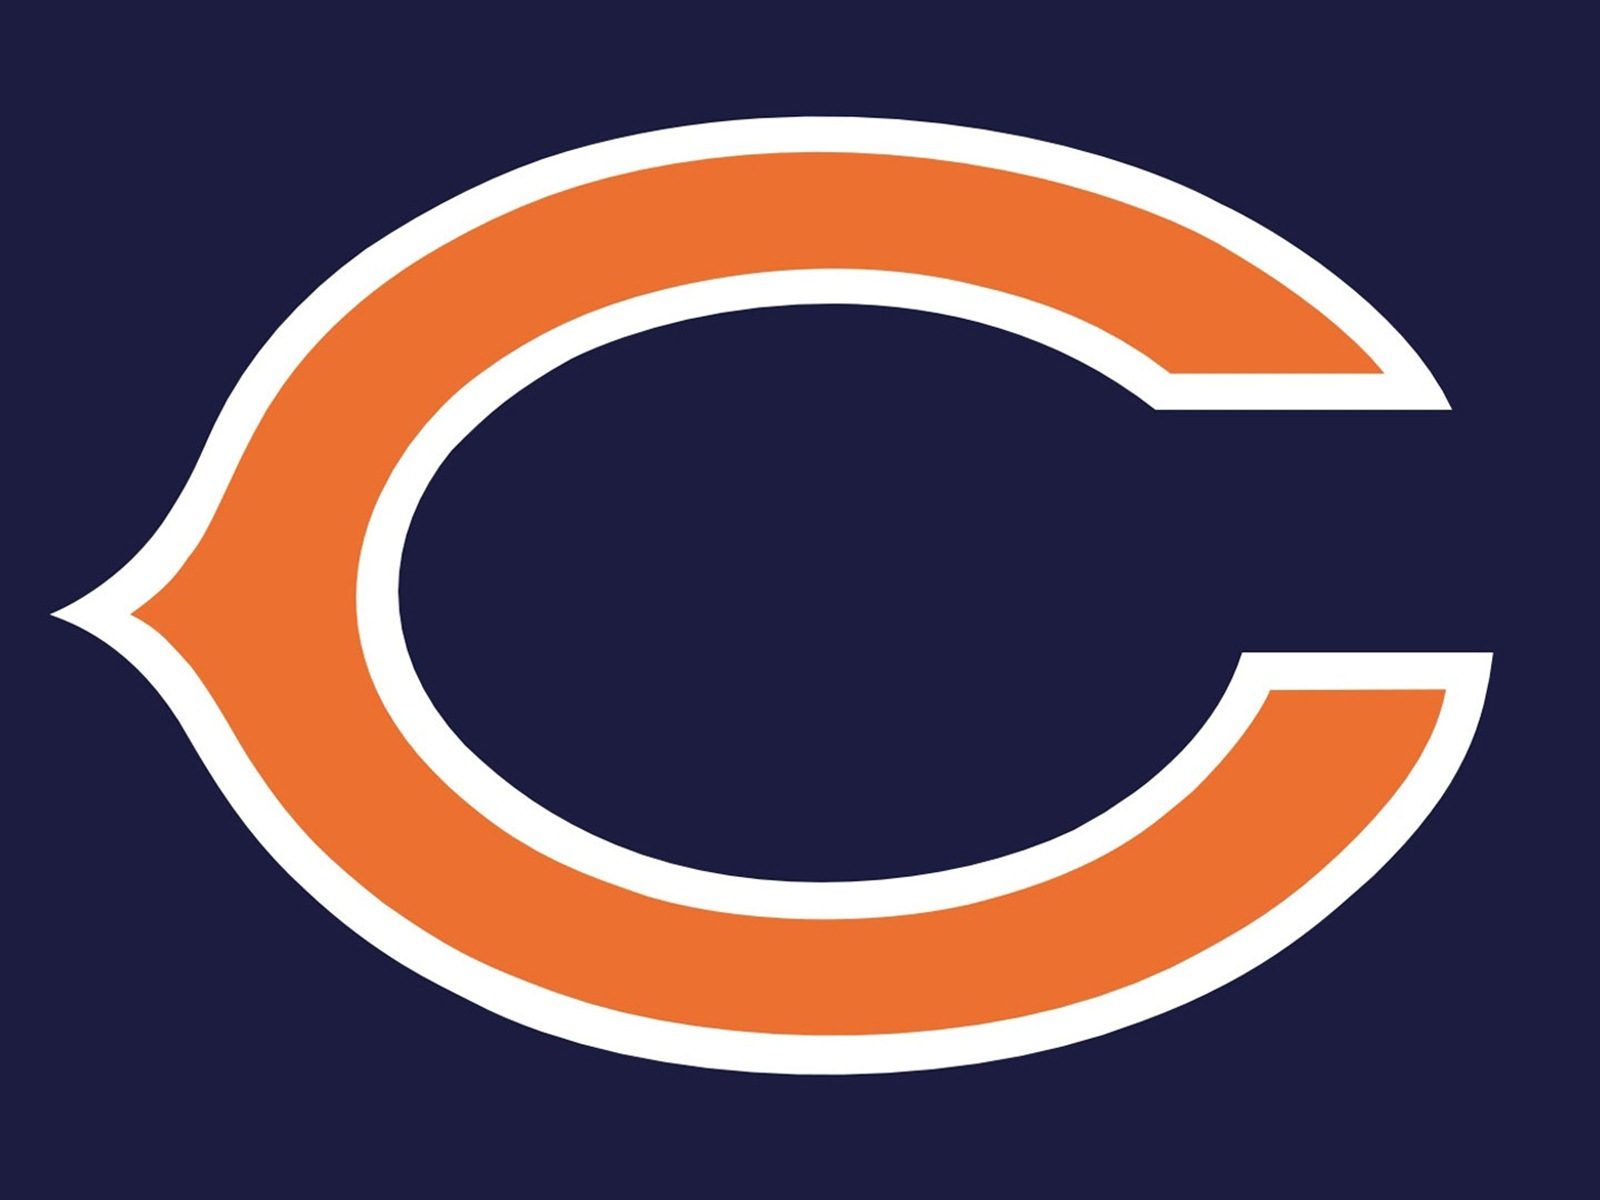 Chicago Bears trade Dick Butkus fires shot at Detroit Lions Justin Fields expected to play